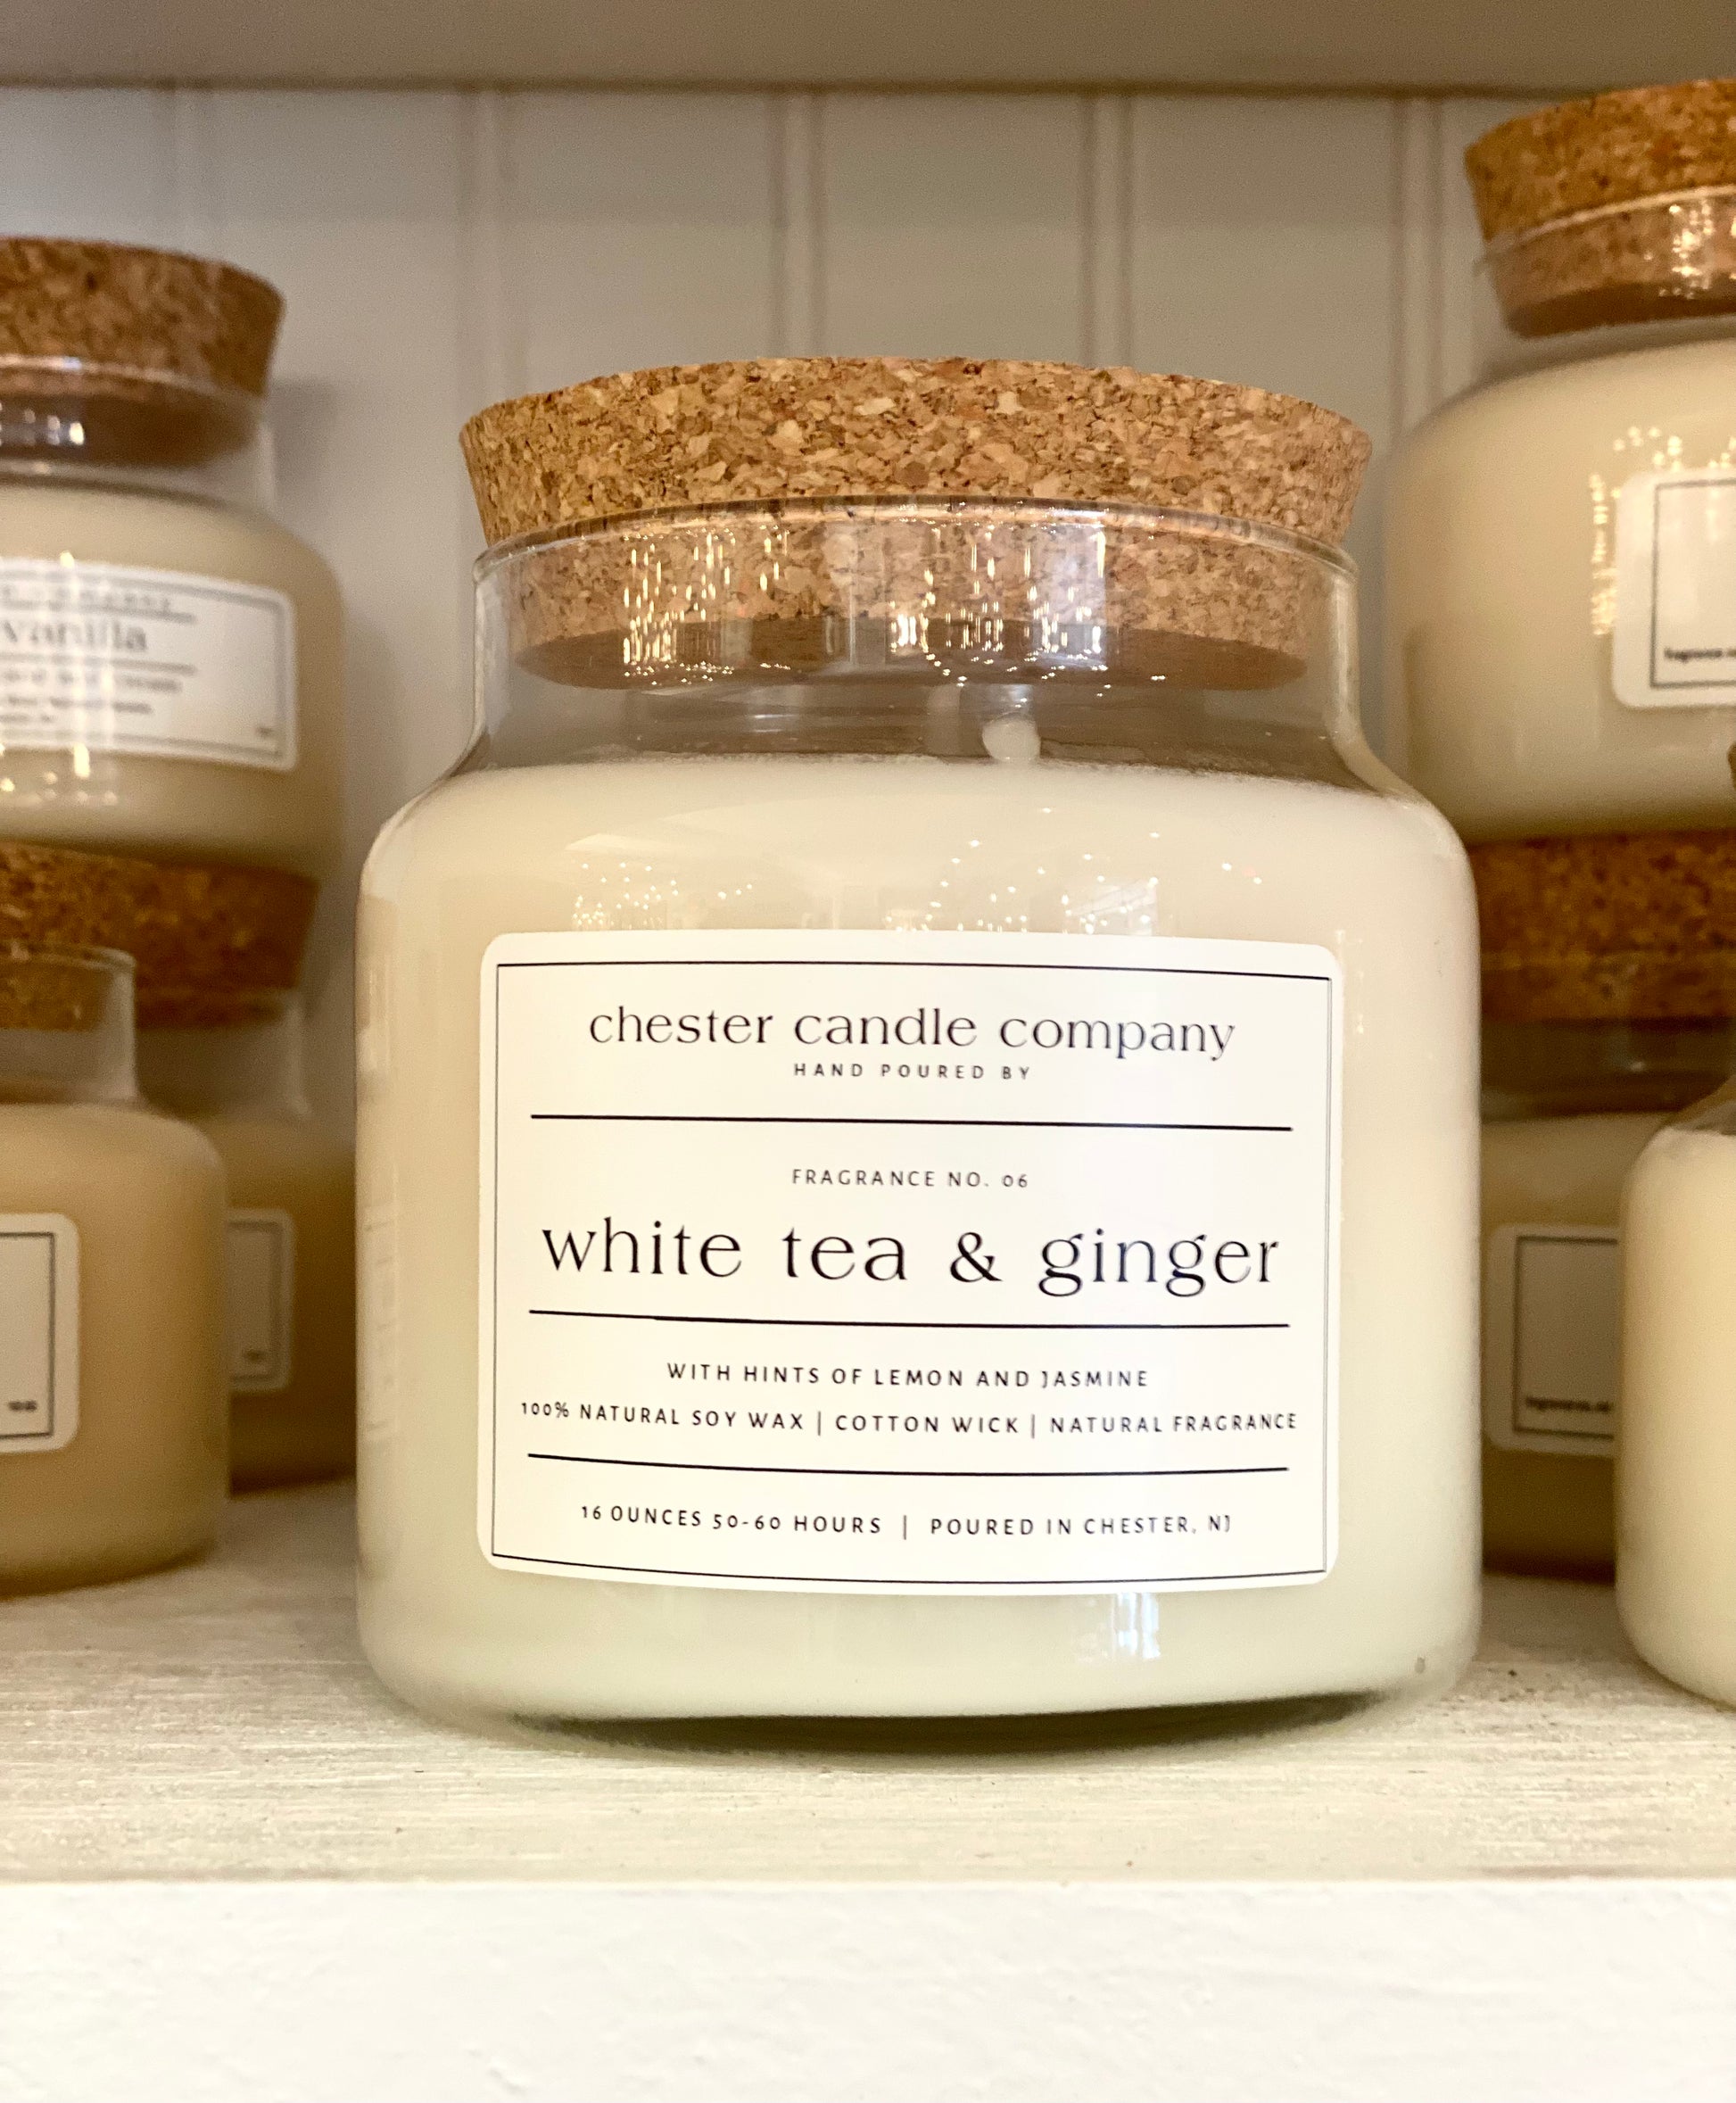 Natural Soy Wax Candle in a Clear Glass Apothecary-Style Jar and a Cork Lid. White Label on the Jar Reads "chester candle company. Fragrance No. 06. white tea & ginger with hints of lemon and jasmine. 100% Natural Soy Wax, Cotton Wick, Natural Fragrance. 16 ounces 50-60 hours. Poured in Chester, NJ”